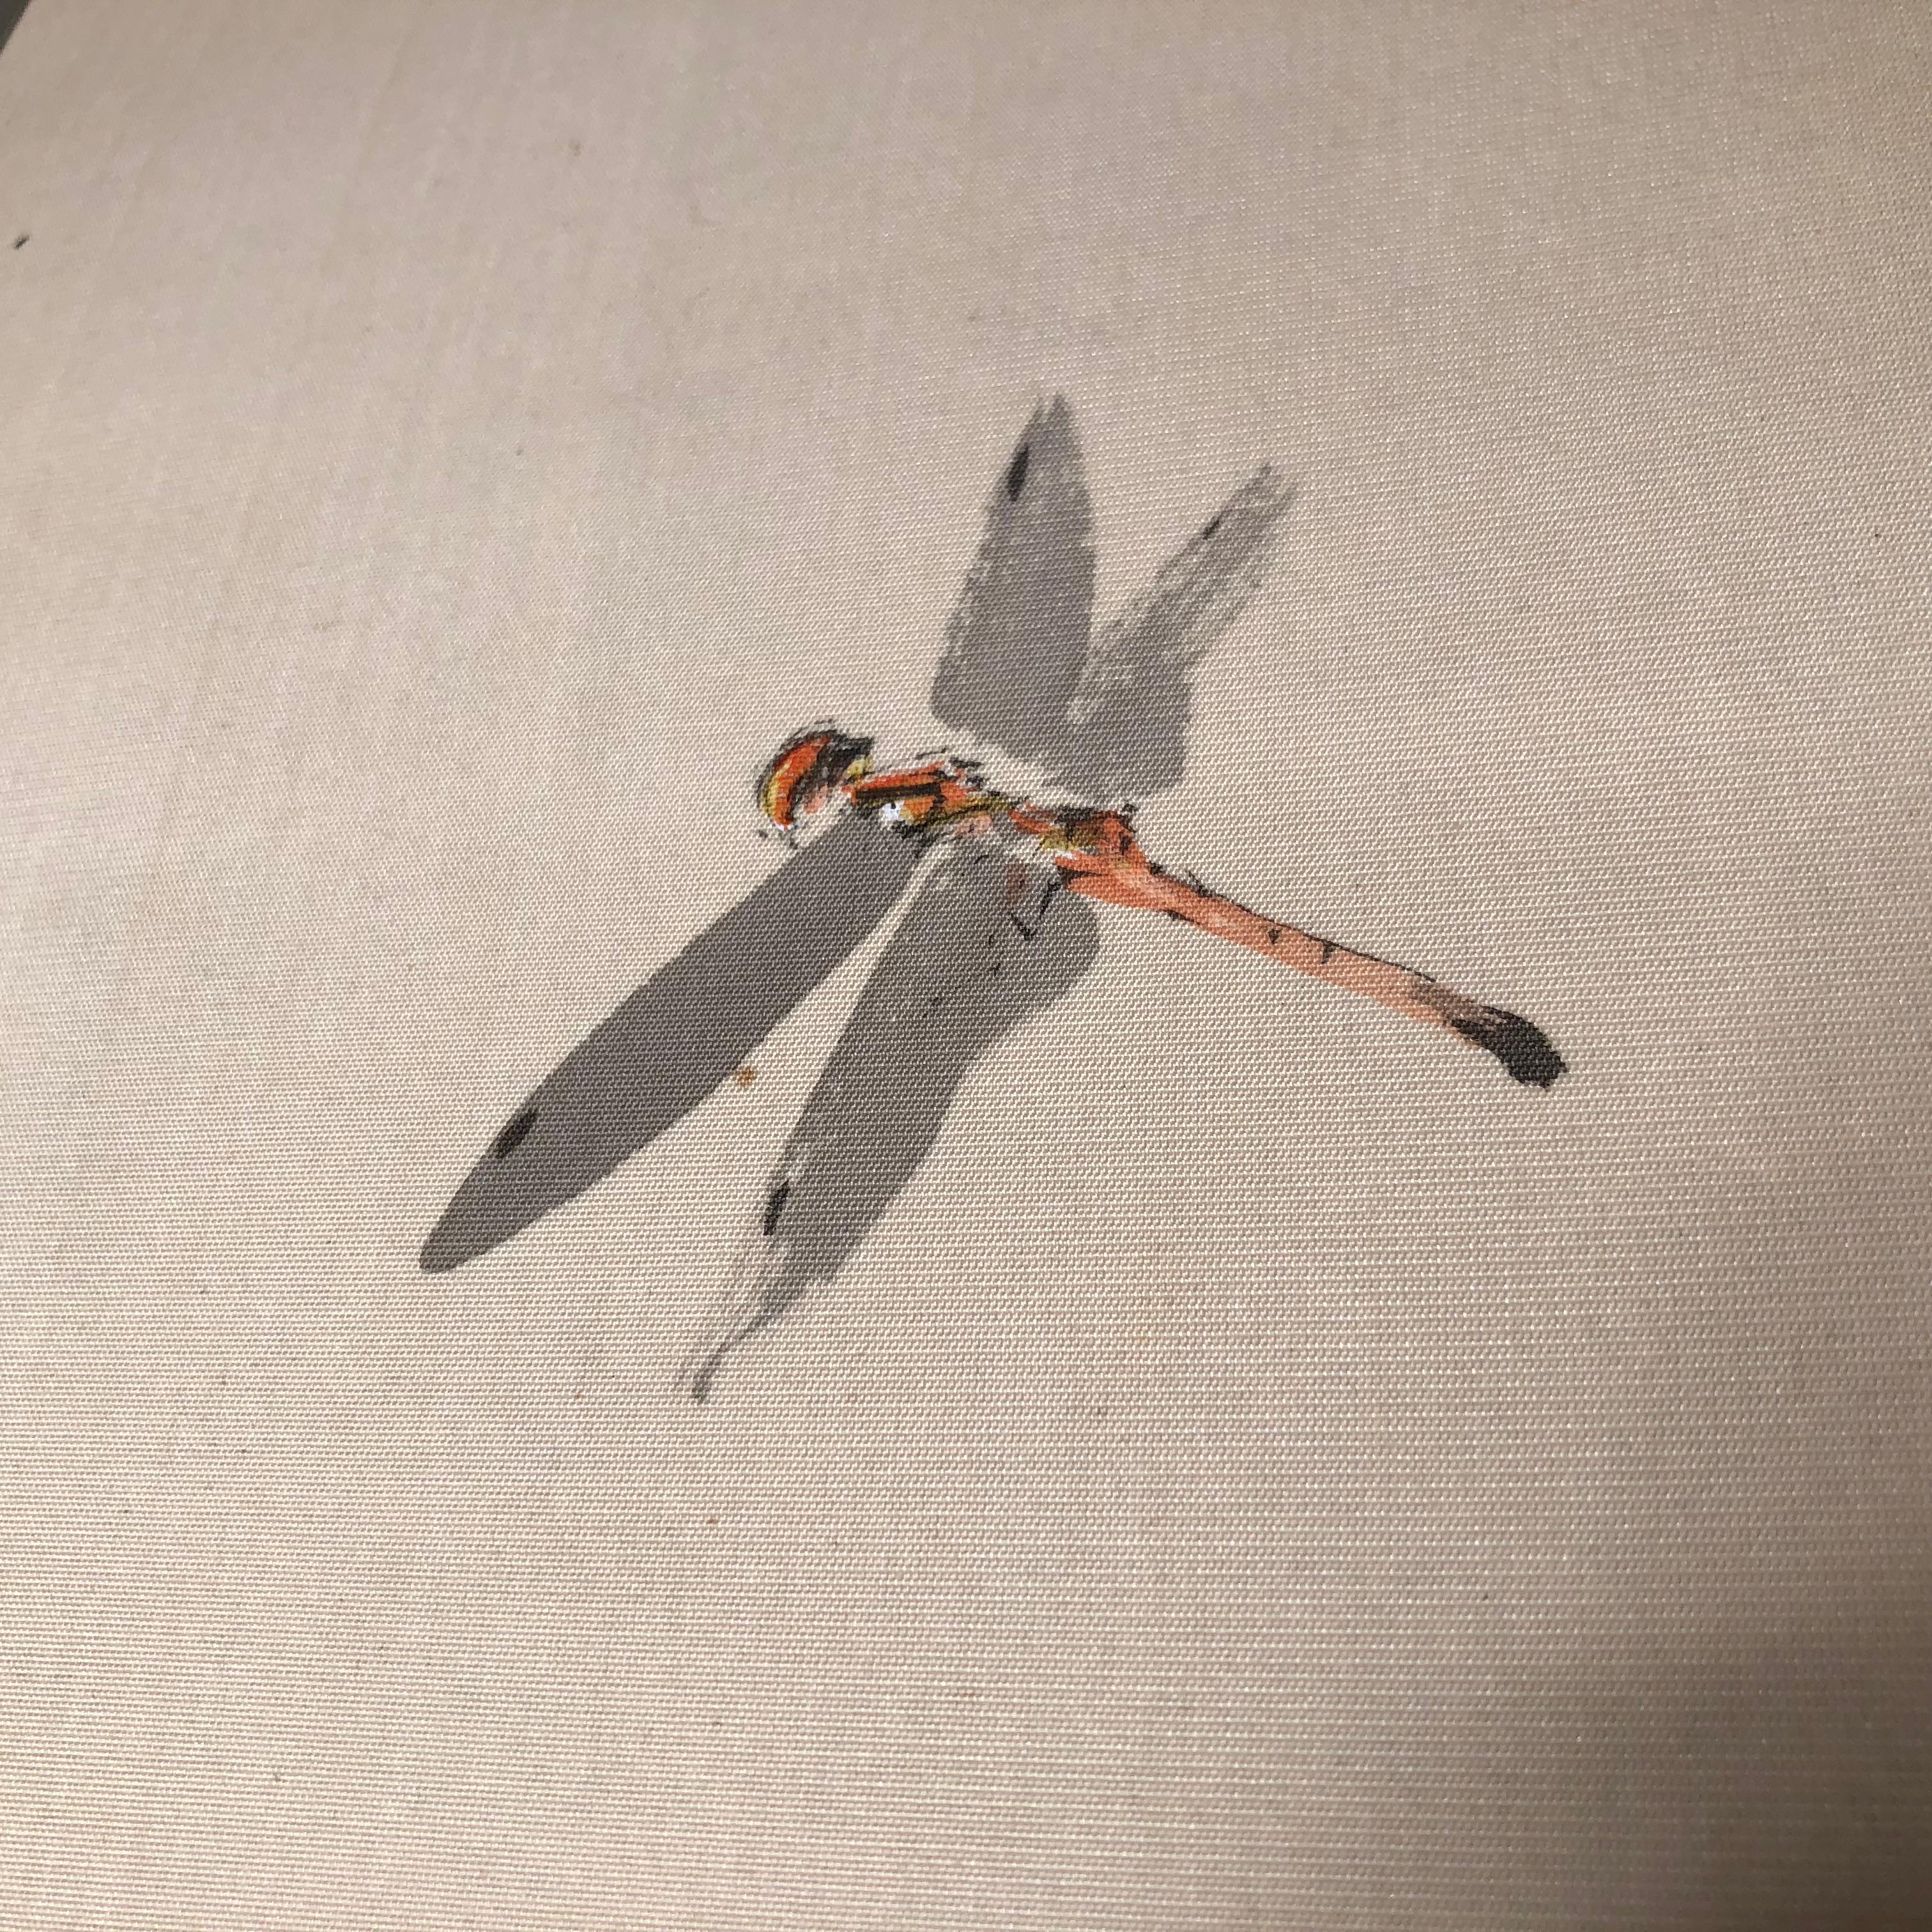 A rare motif and find.

A very fine and delicate Japanese antique hand-painted silk scroll of a dragonfly, Meiji period, 19th century.

Hand painting in lively colors with great details.

Old bone rollers. Original tomobako collector and